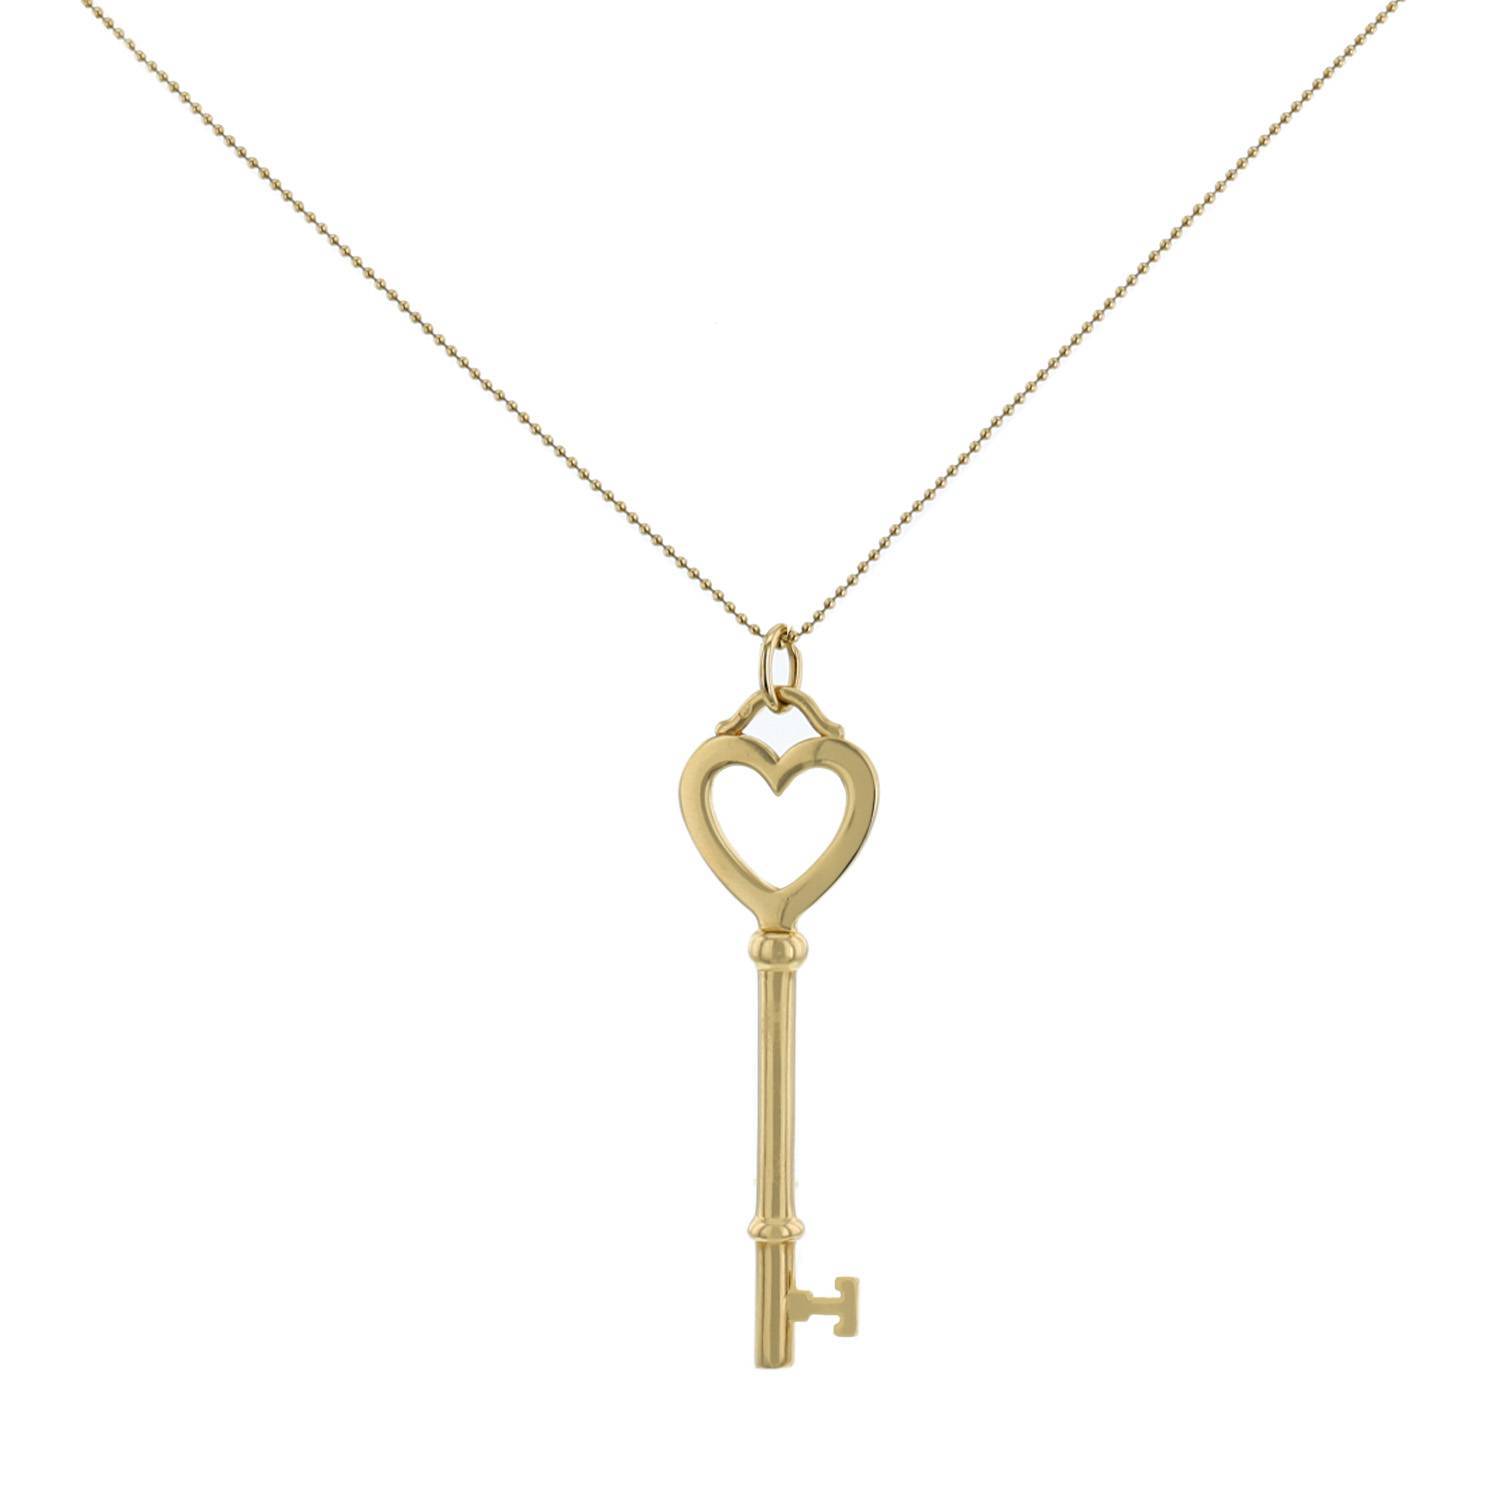 Return to Tiffany® Lovestruck Heart Tag Pendant in Silver and Rose Gold,  Medium | Tiffany & Co.